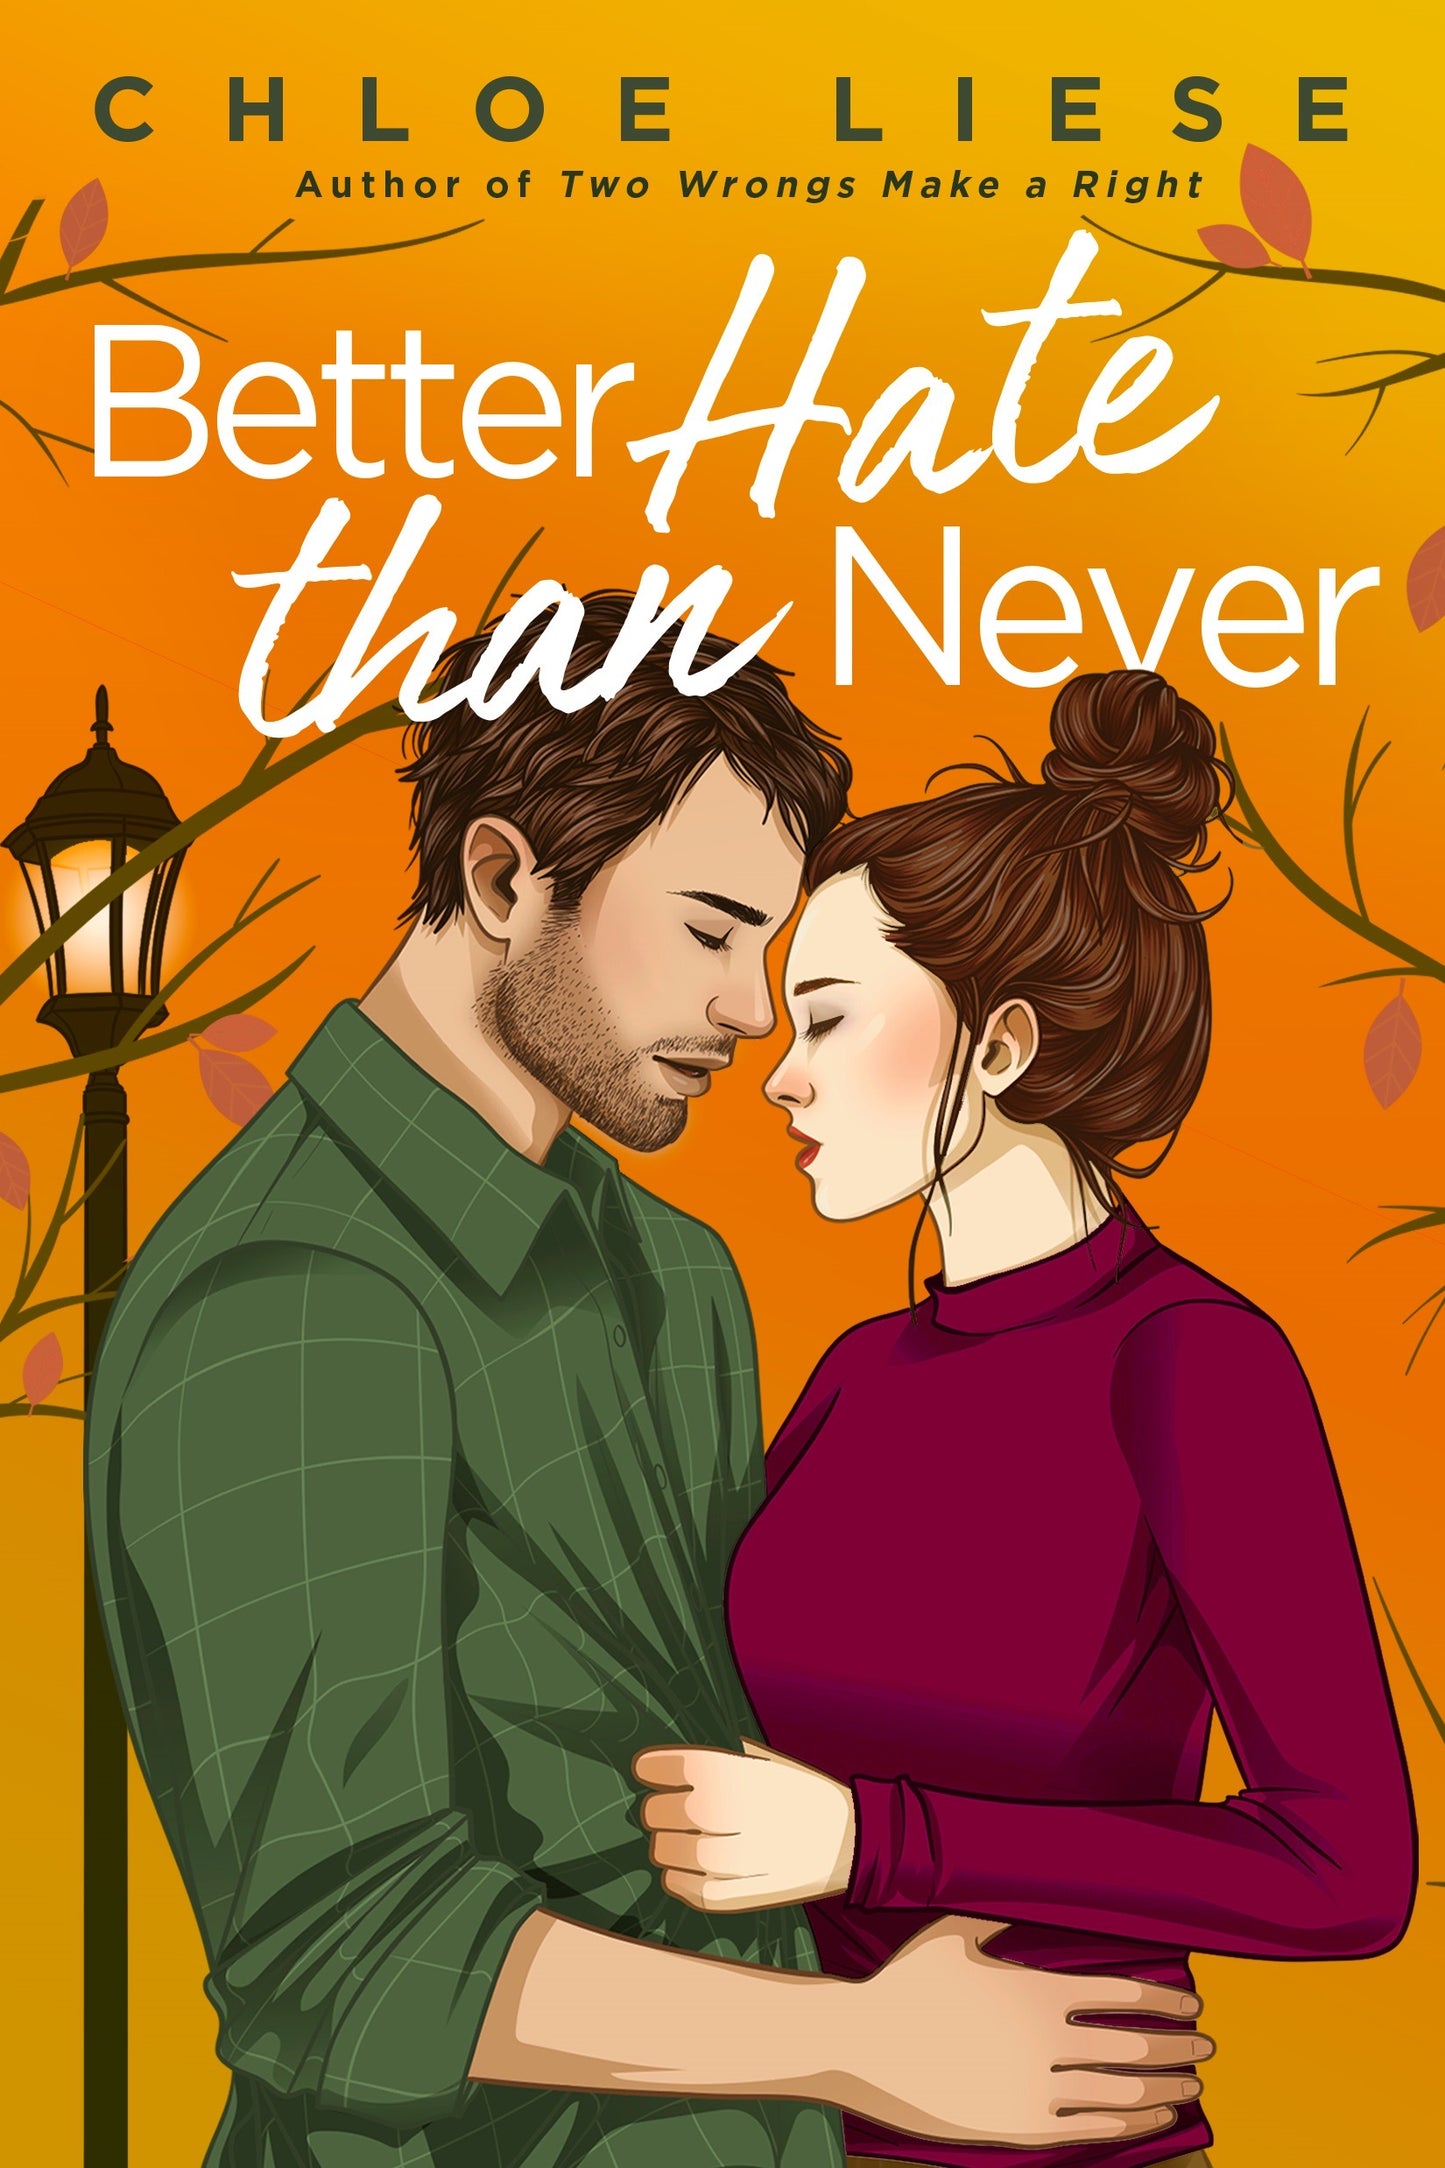 Better Hate Than Never (The Wilmot Sisters #2) (Paperback)